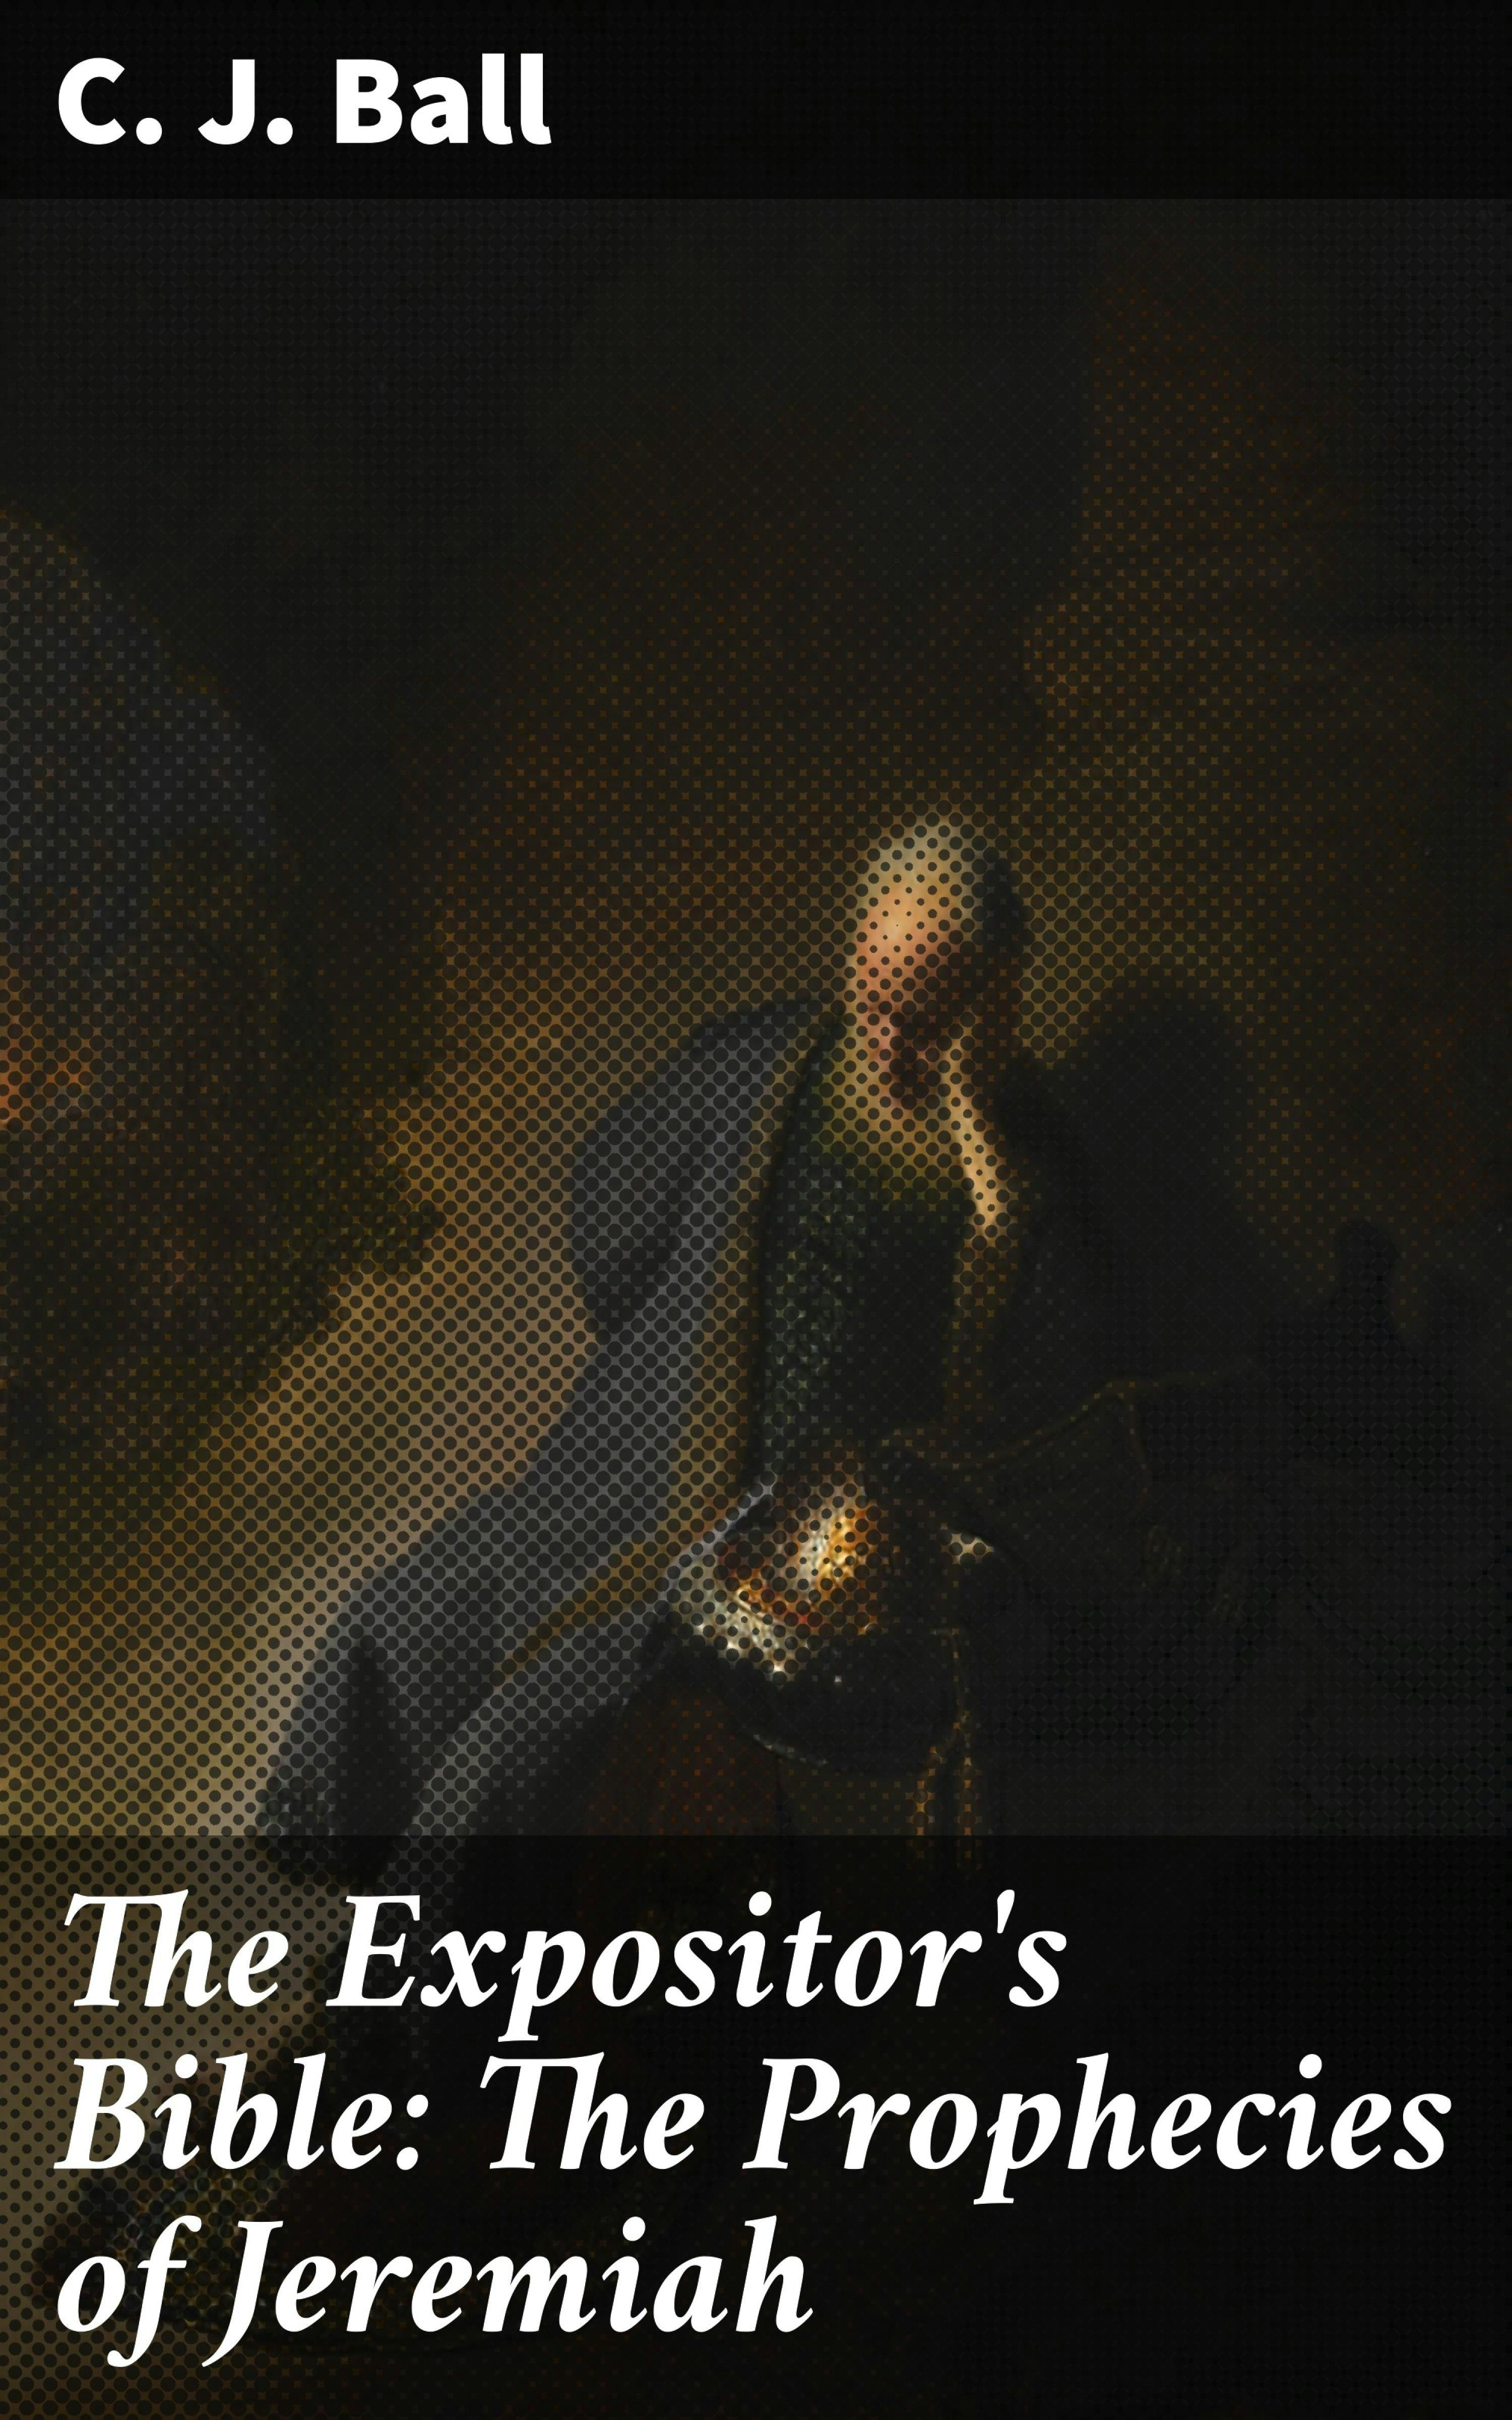 The Expositor's Bible: The Prophecies of Jeremiah: With a Sketch of His Life and Times - C. J. Ball